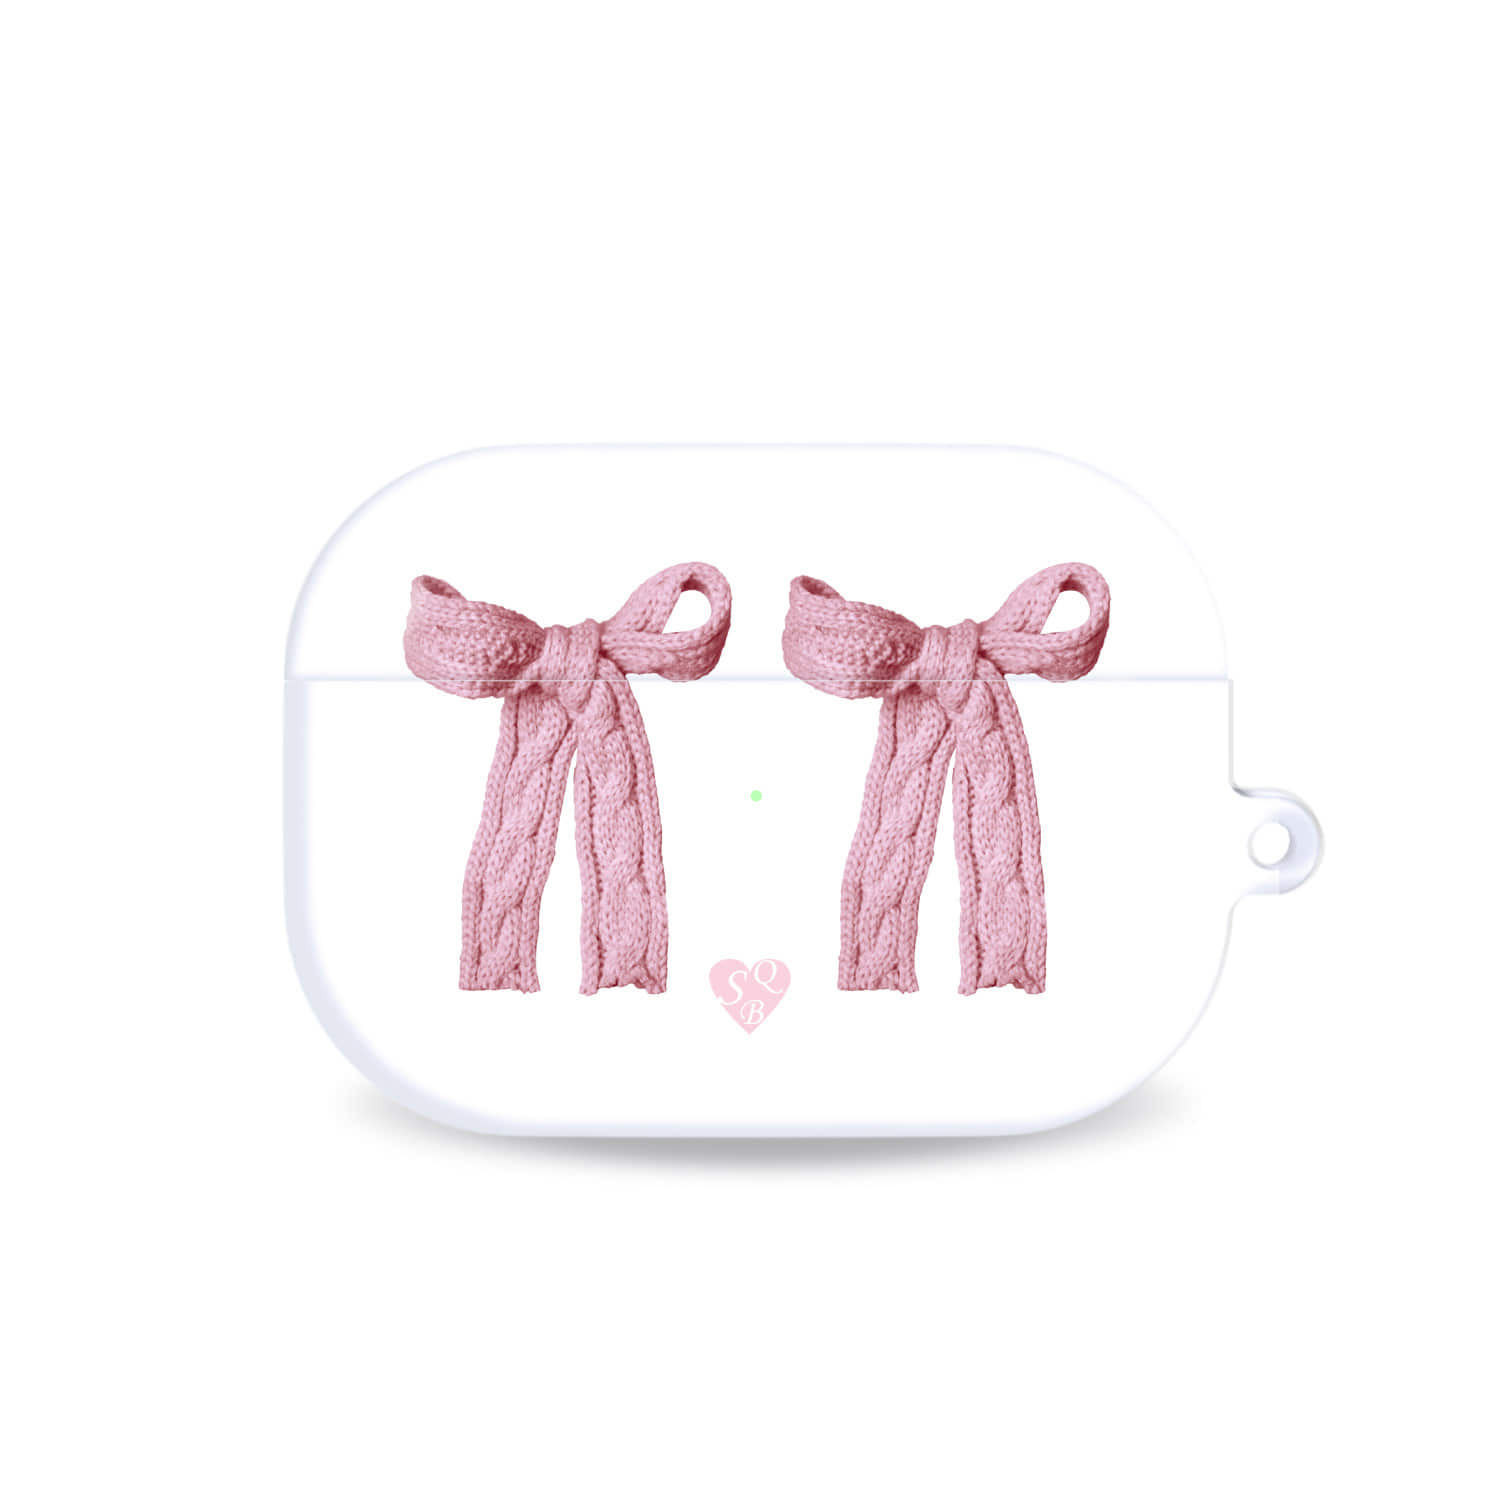 [airpods case] Pink knit ribbon airpods case